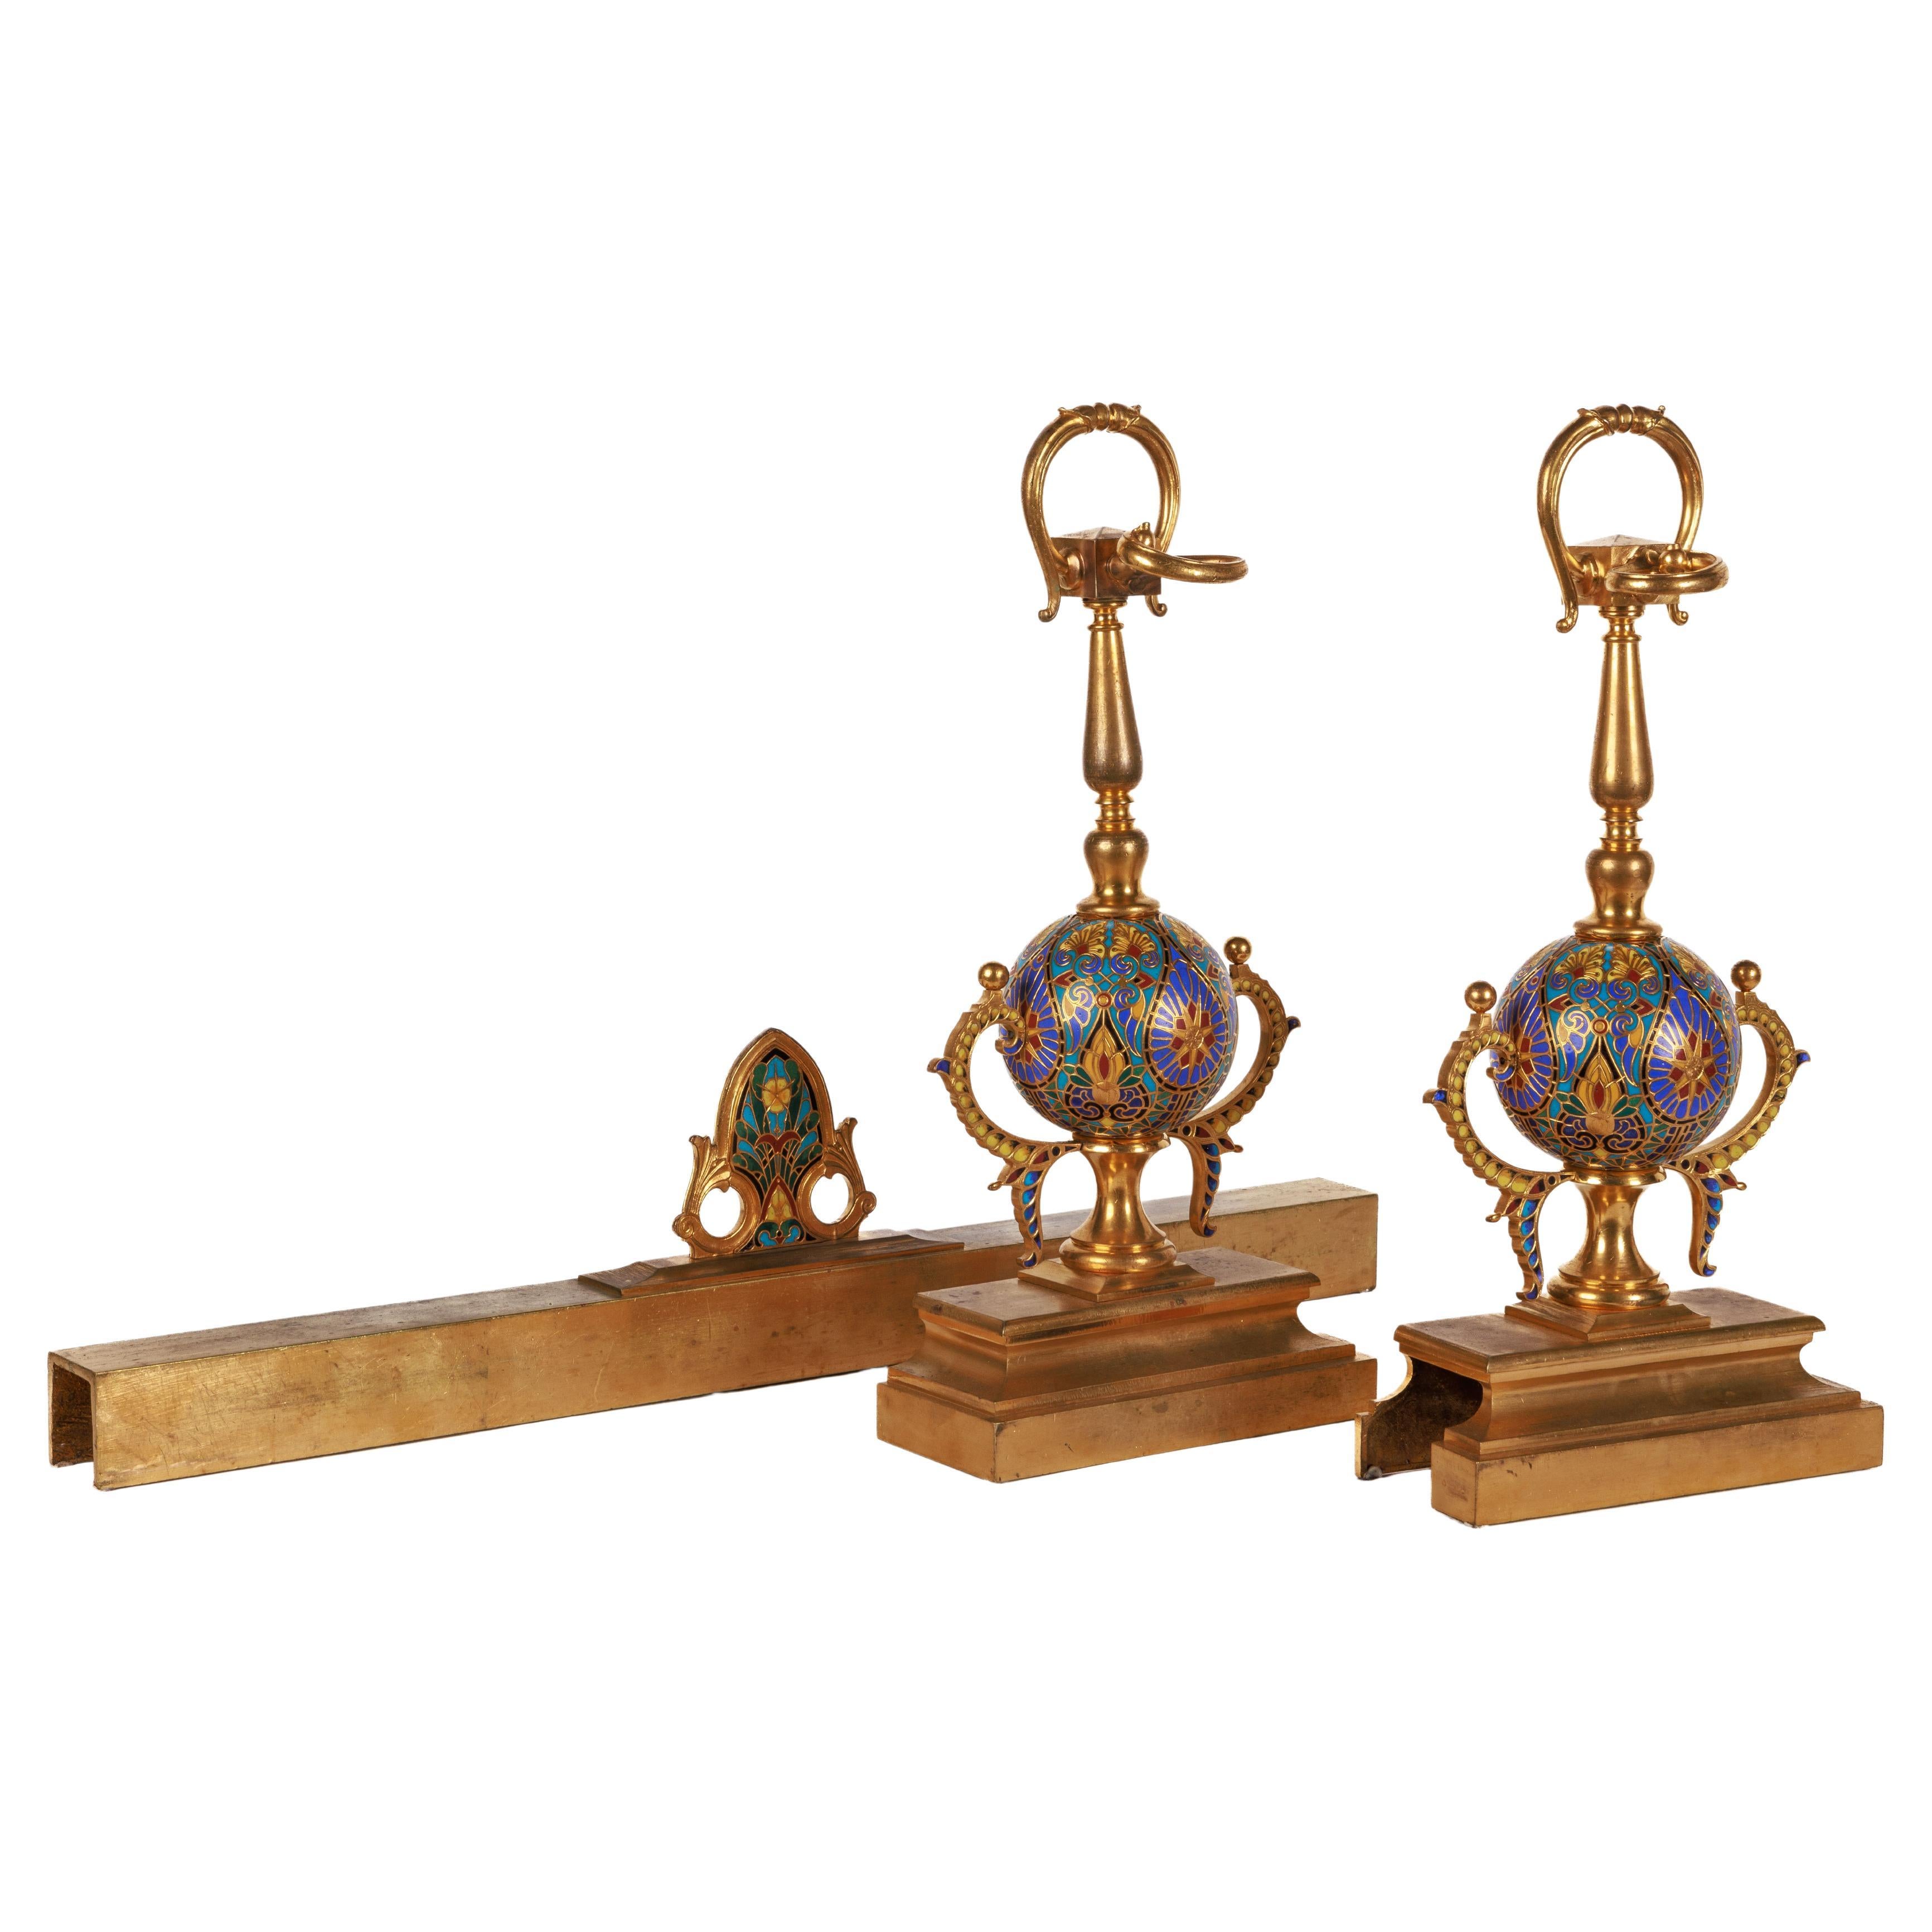 Ferdinand Barbedienne, A Pair of French Ormolu and Champleve Enamel Andirons For Sale